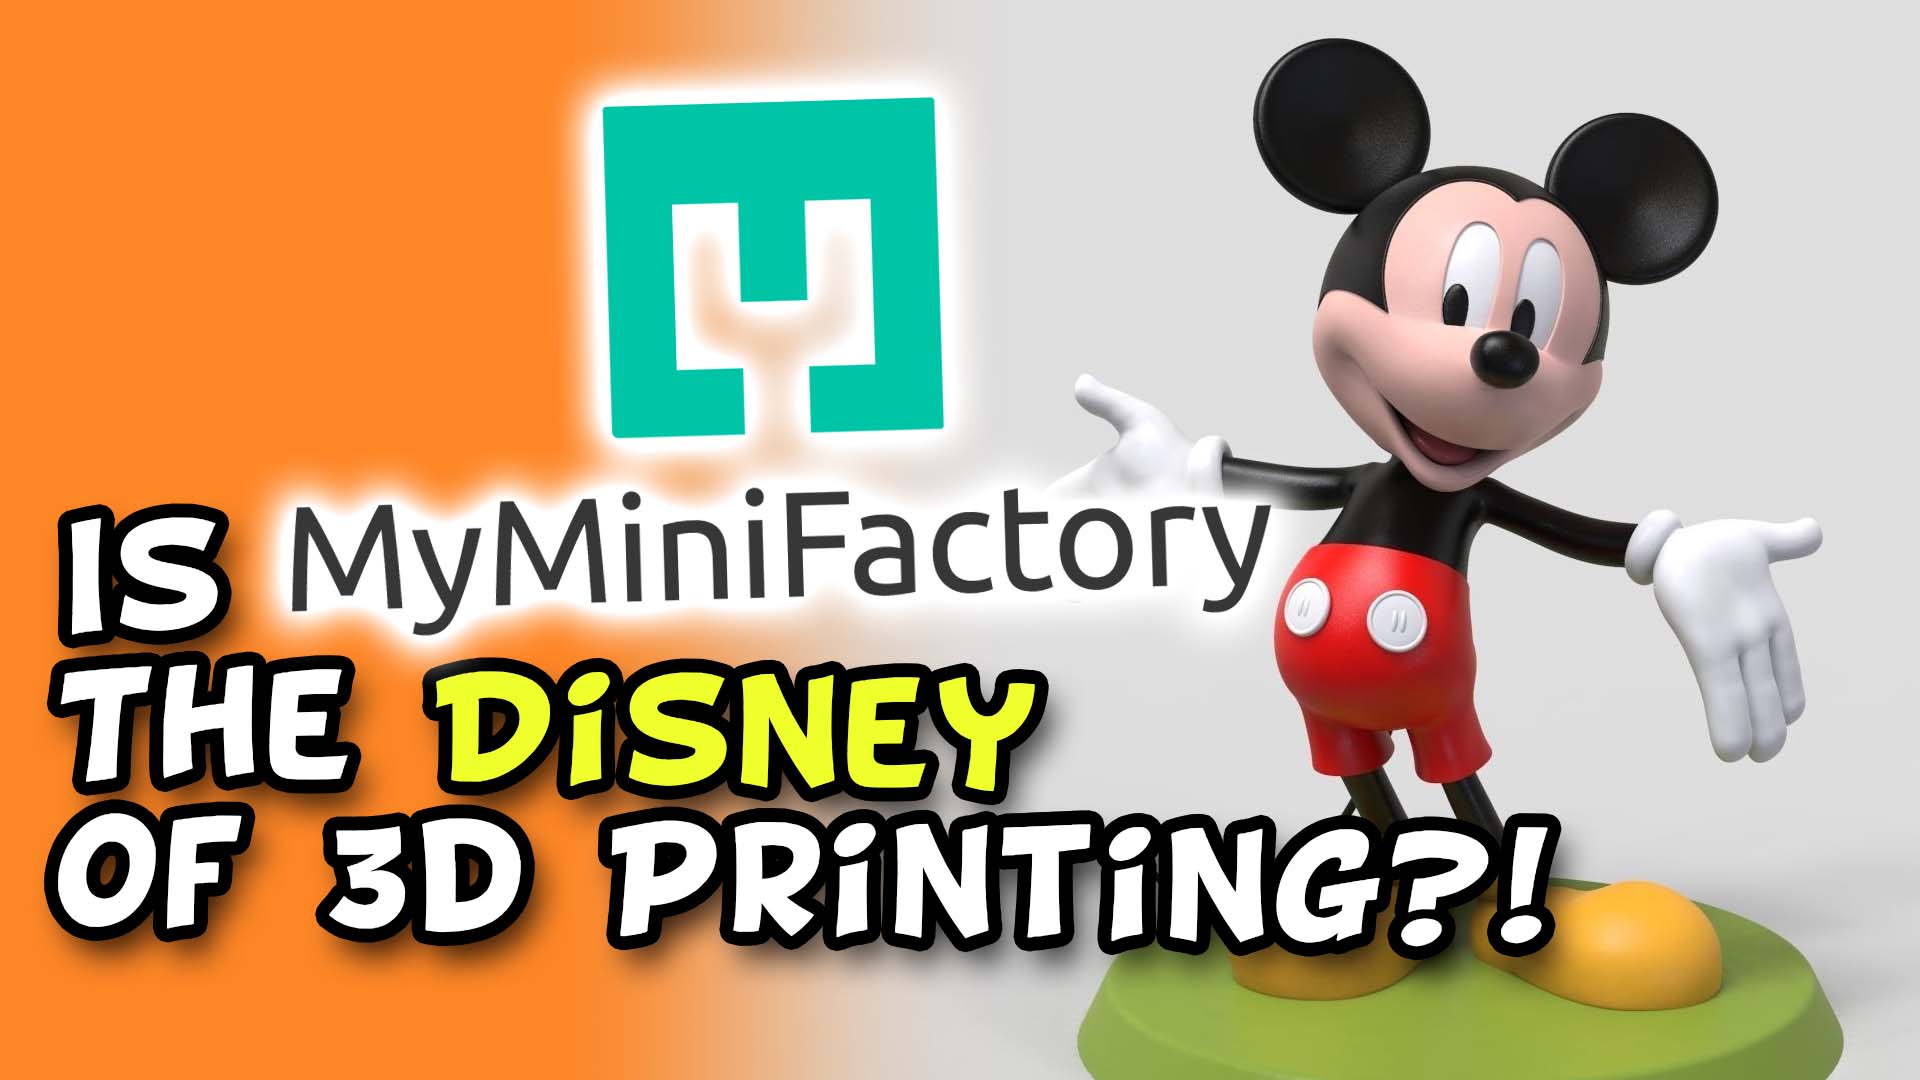 IS MyMiniFactory the Disney of 3d Printing?!